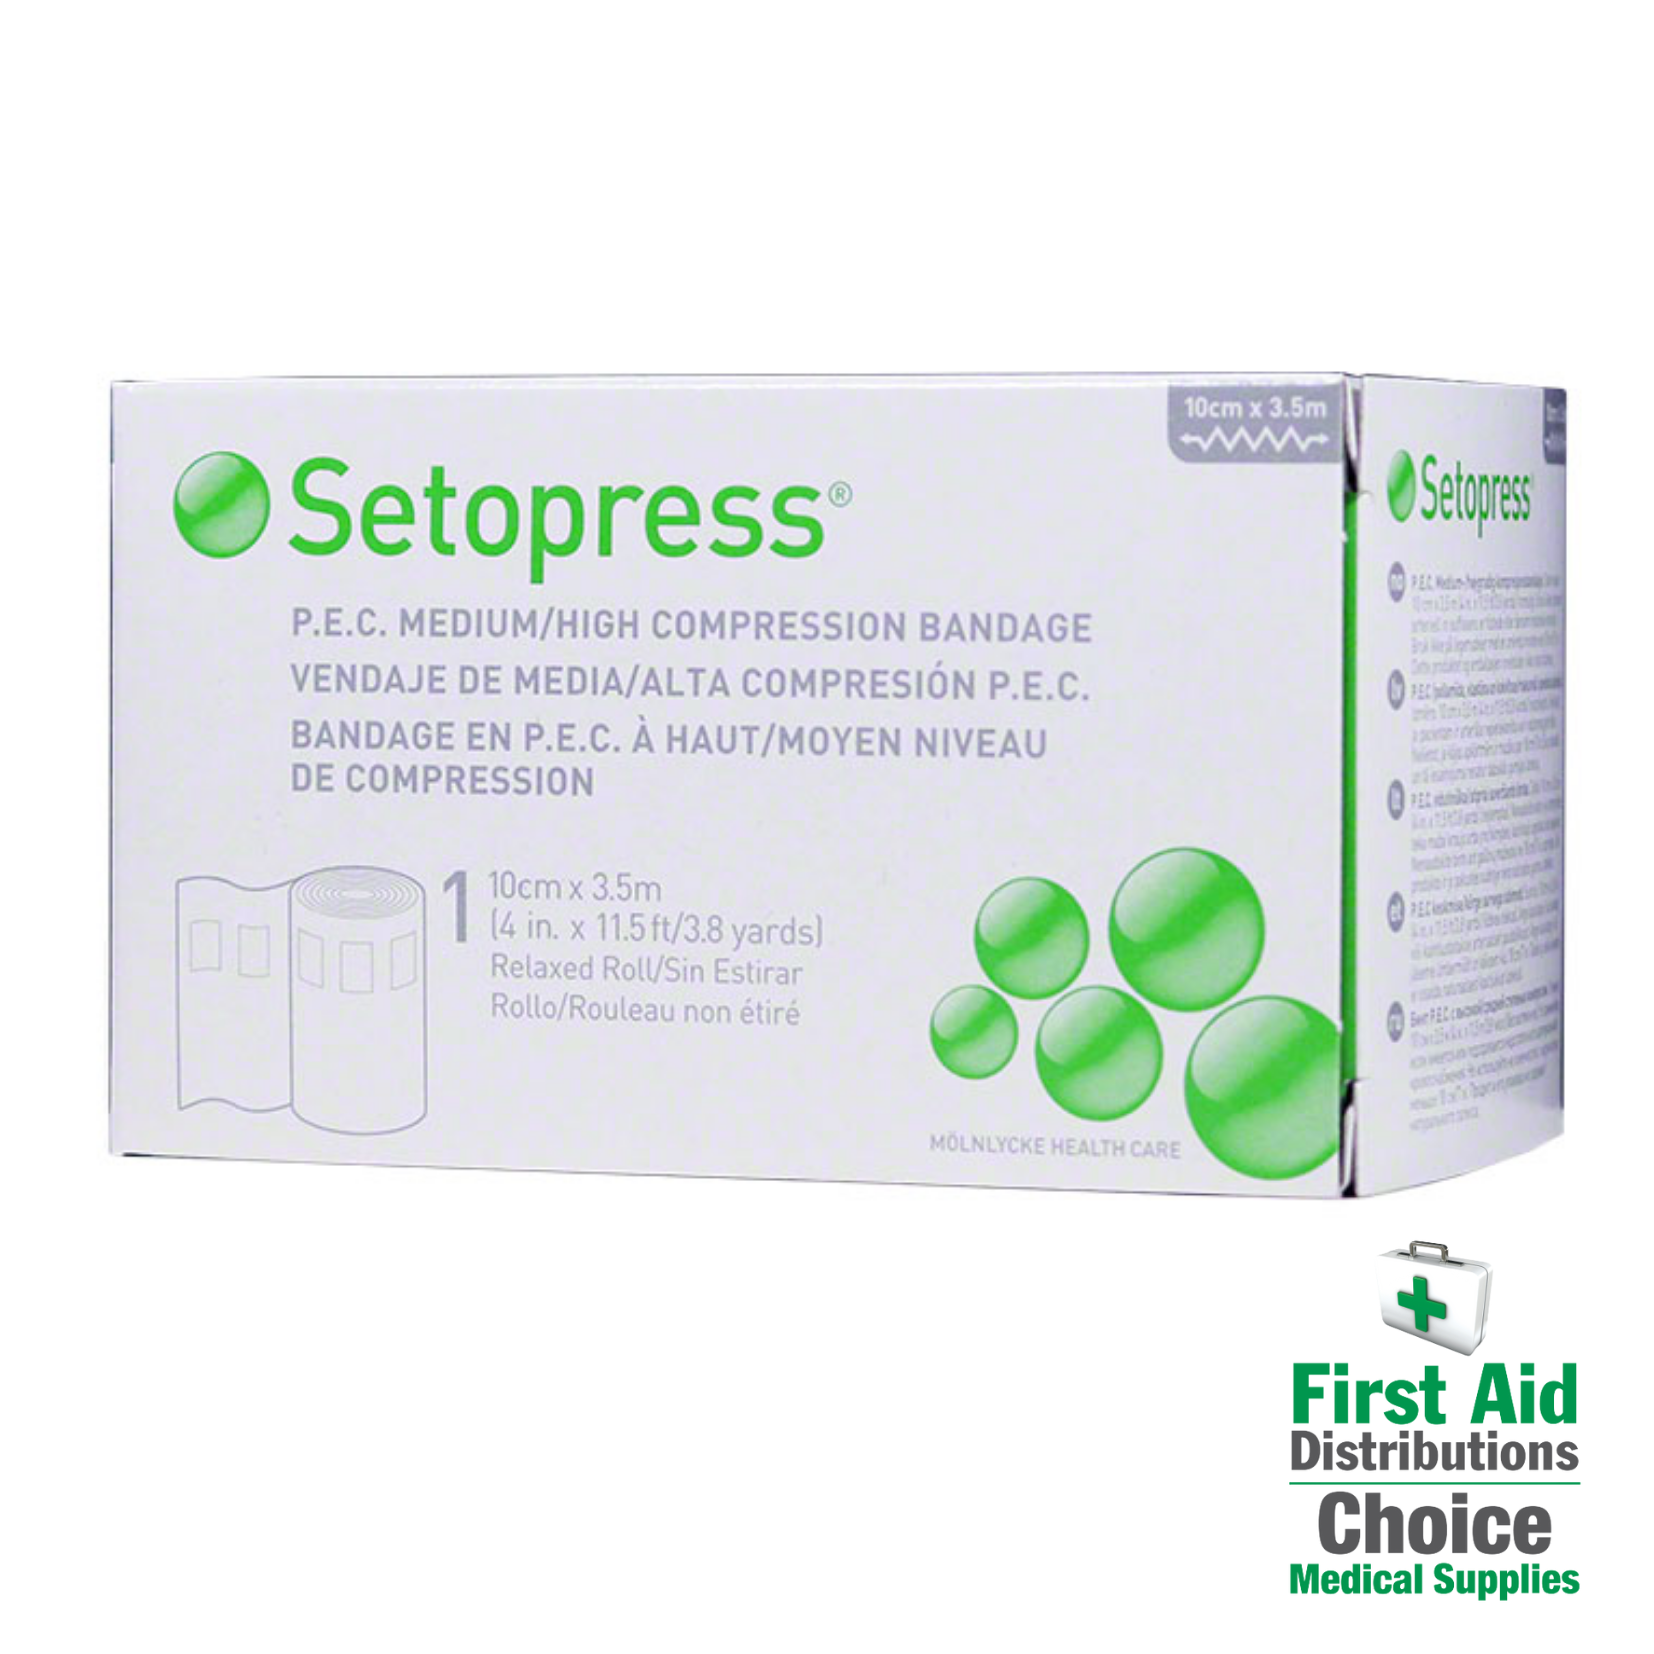 collections/Setopress_Bandage_First_Aid_Distributions_2.png